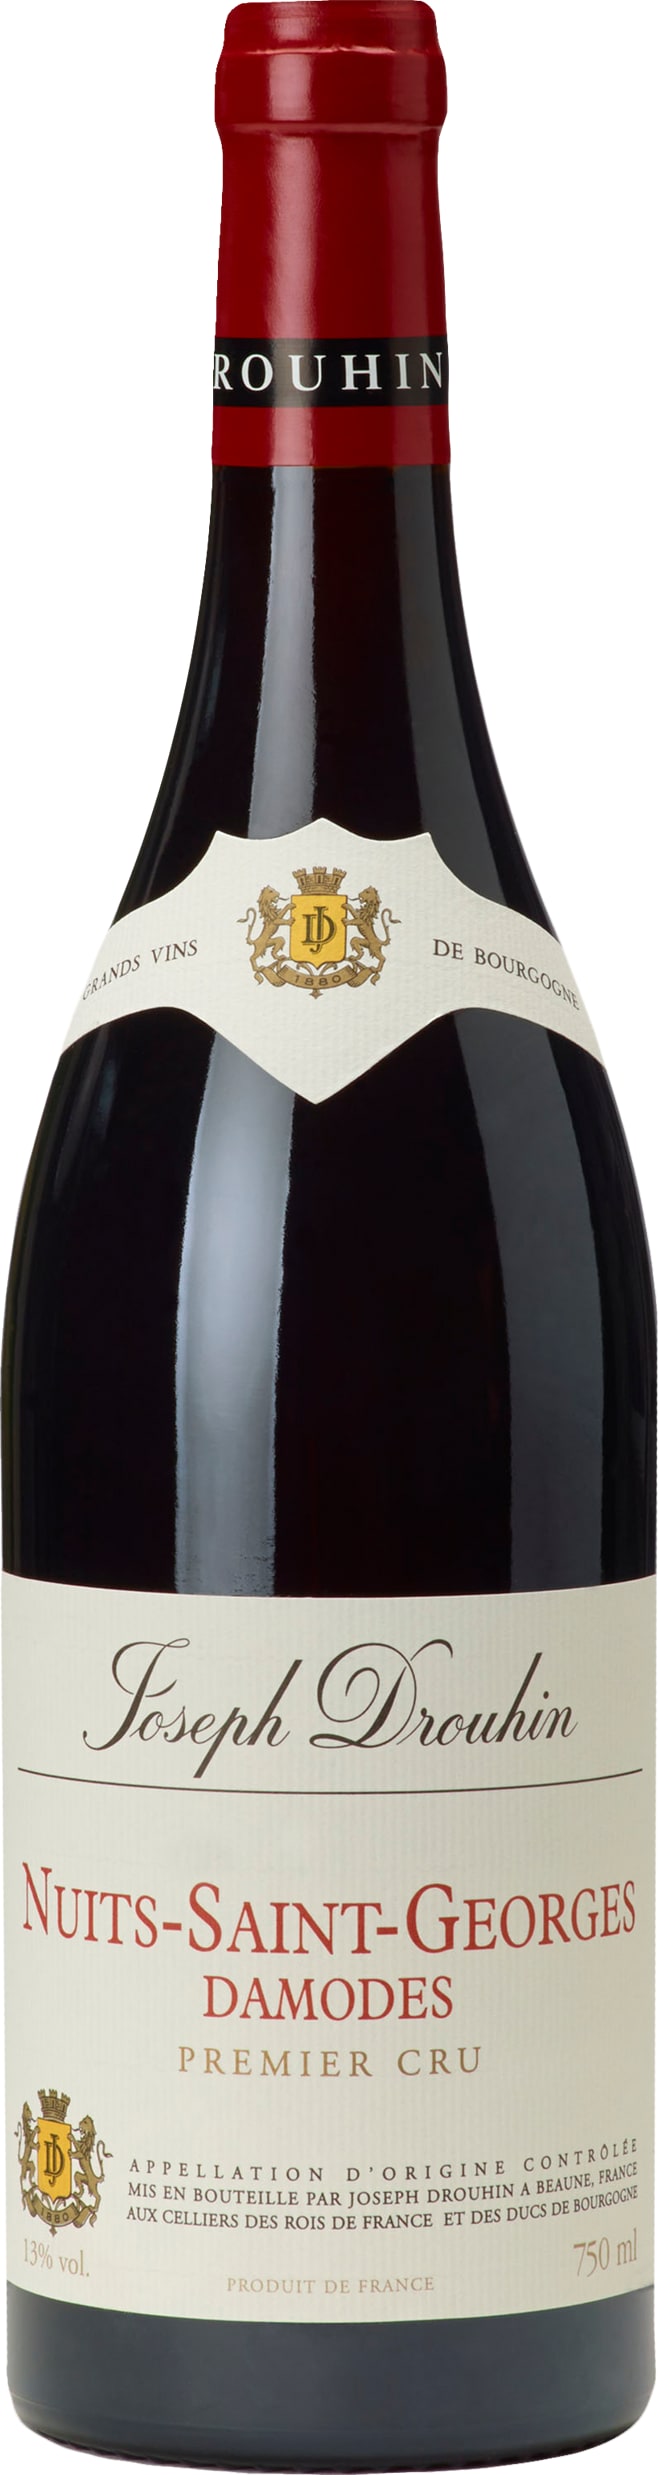 Joseph Drouhin Nuits-Saint-Georges Premier Cru Damodes 2019 75cl - Buy Joseph Drouhin Wines from GREAT WINES DIRECT wine shop